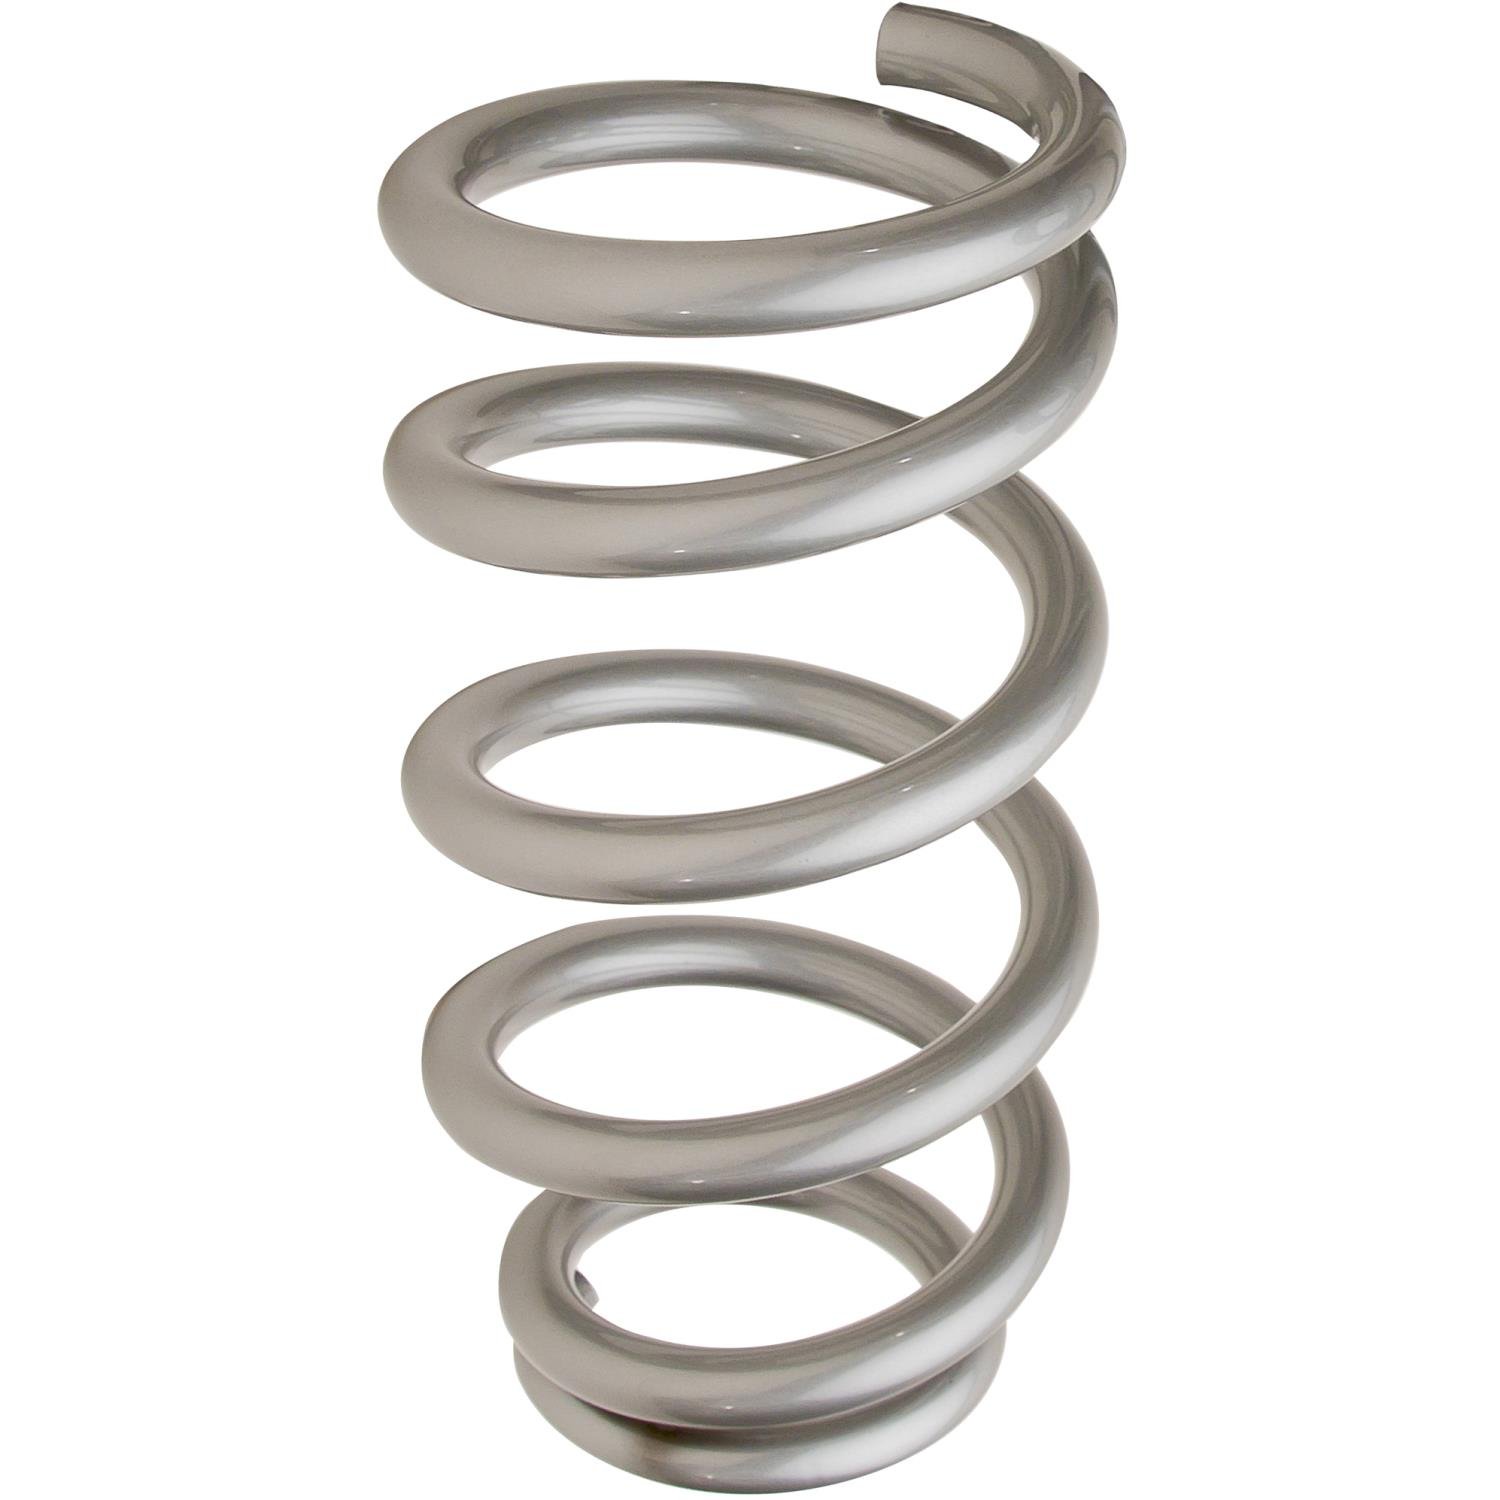 Variable Rate High-Tensile Spring 10"